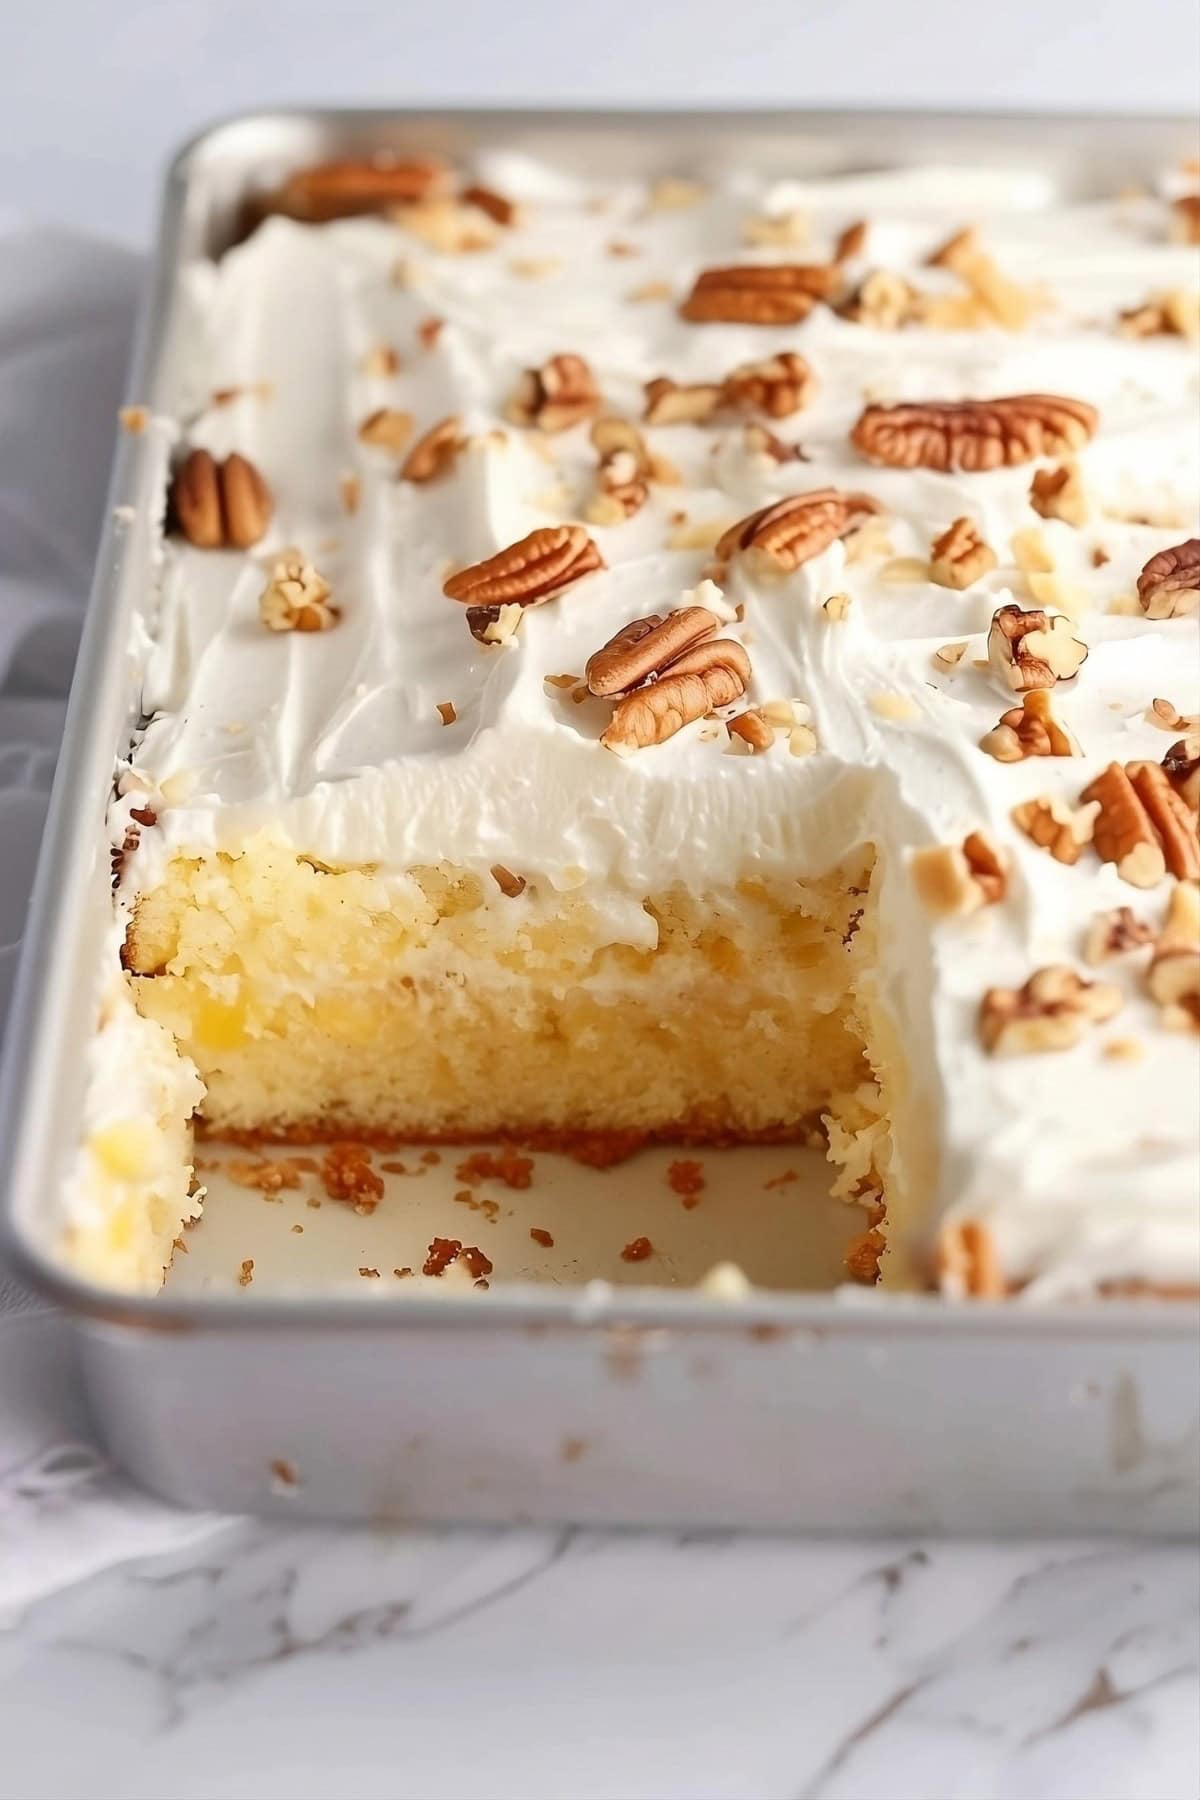 Pineapple cake baked in sheet pan topped with frosting and chopped pecans.